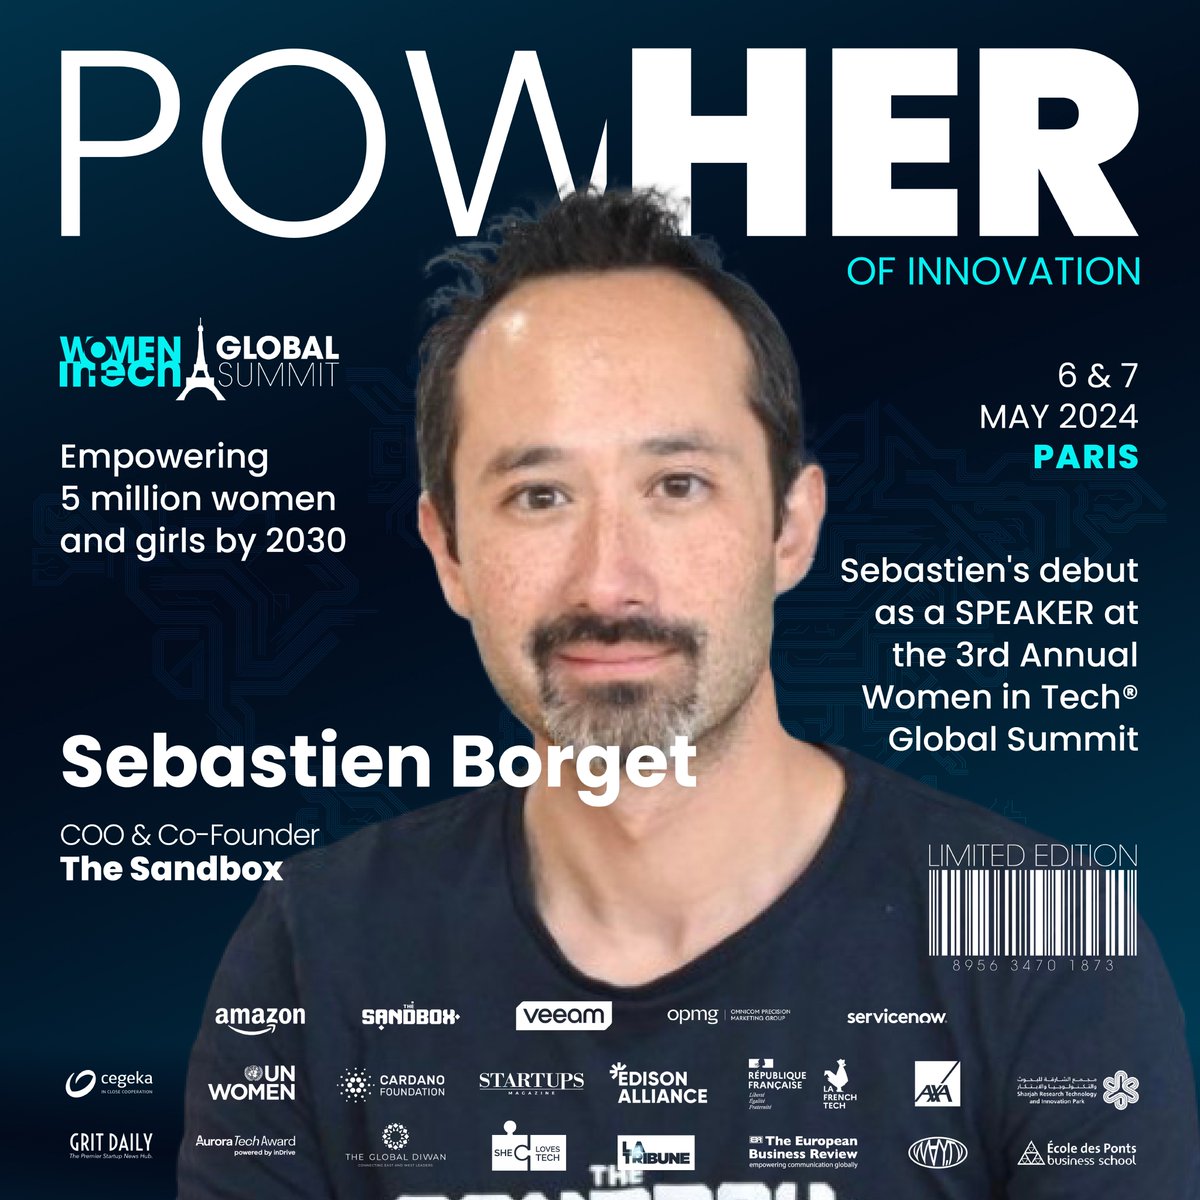 🎉Join us at the Women in Tech® Global Summit, where we’ll be unpacking and admiring the PowHER of Innovation as this year’s theme!💃🔥🔥 Meet our speaker Sebastien Borges, COO & Co-Founder at The Sandbox. Link: lnkd.in/dJrvNNJu #WITGS24 #PowHER